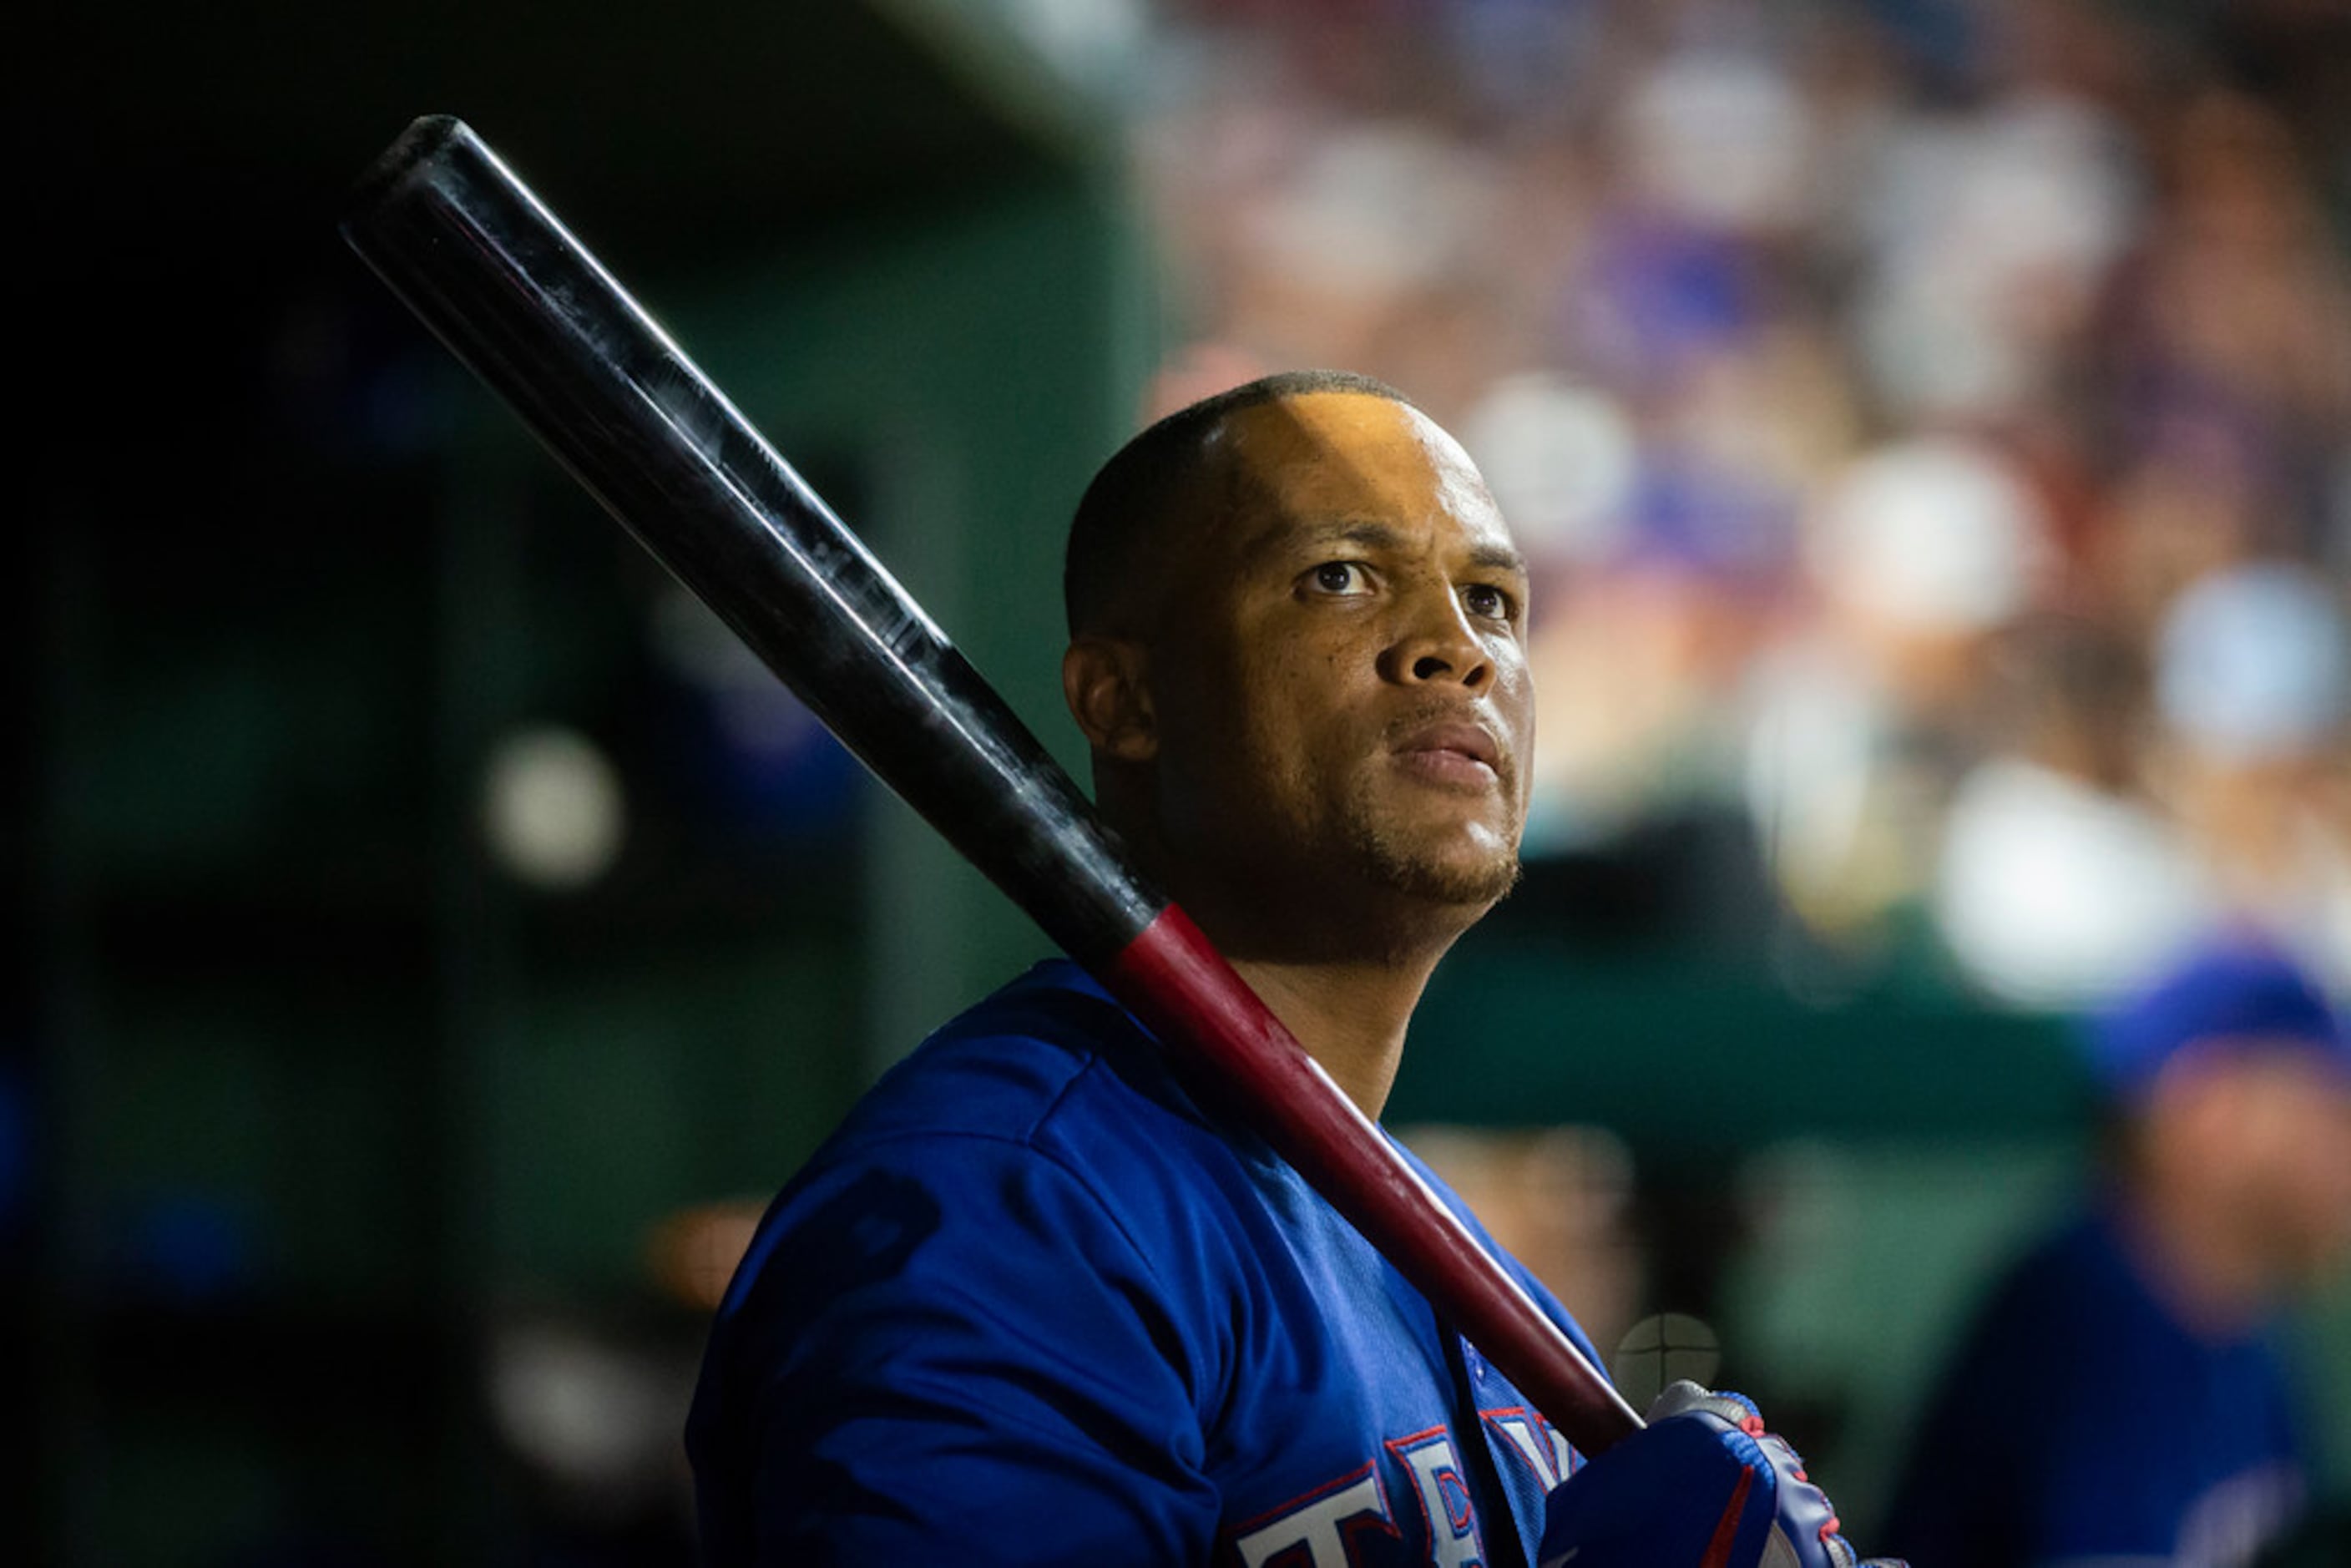 He brings a smile to everyone's face': Adrian Beltre visits Rangers